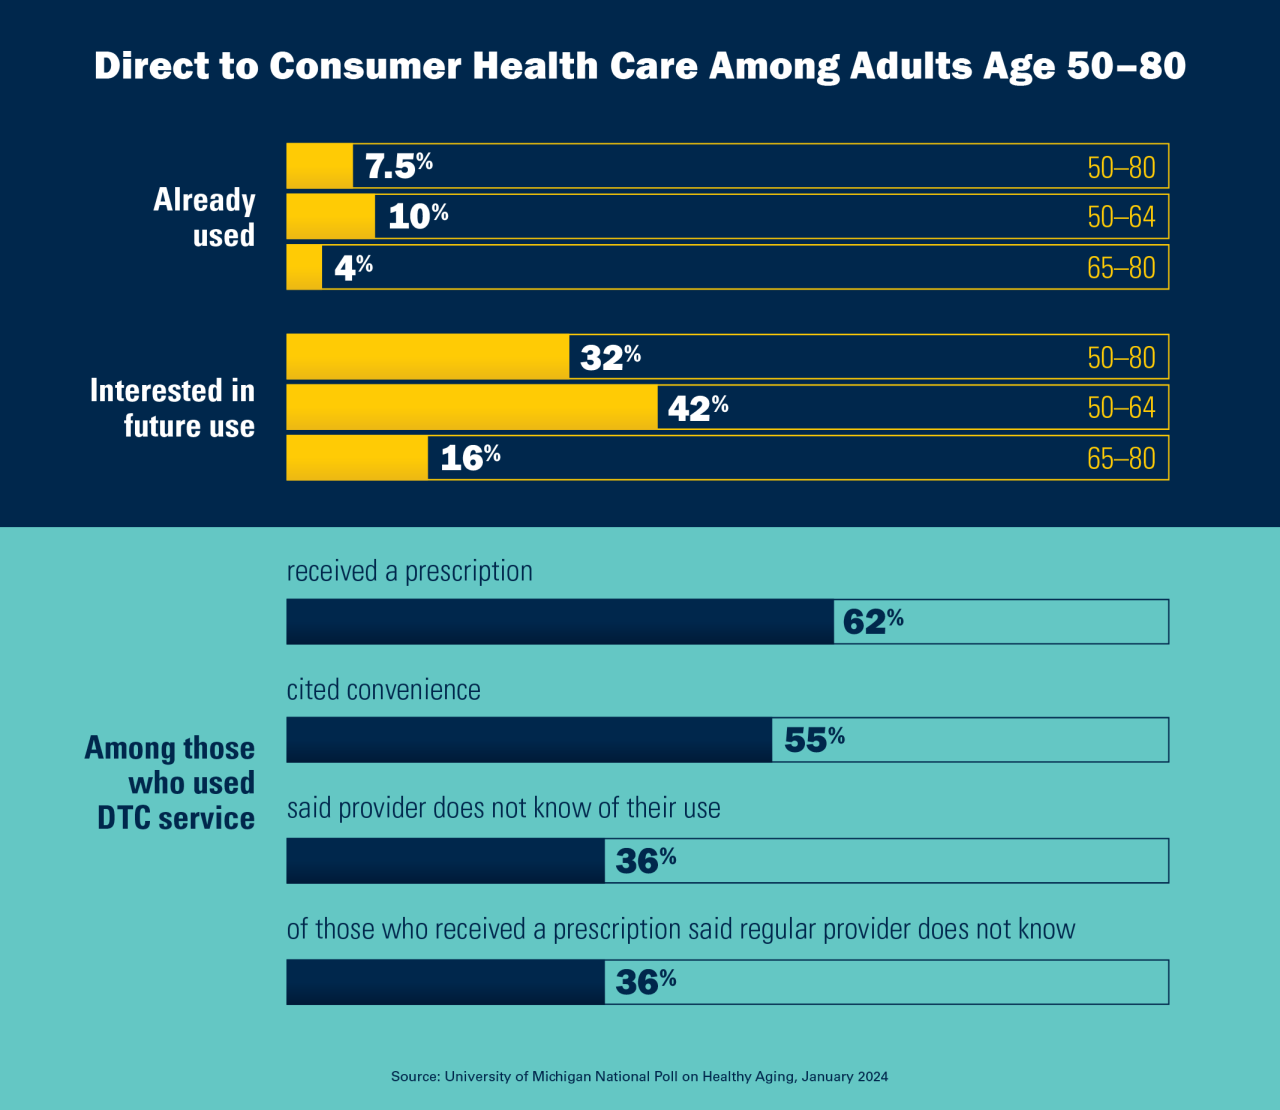 7.5% of adults age 50 to 80 already use direct to consumer health care